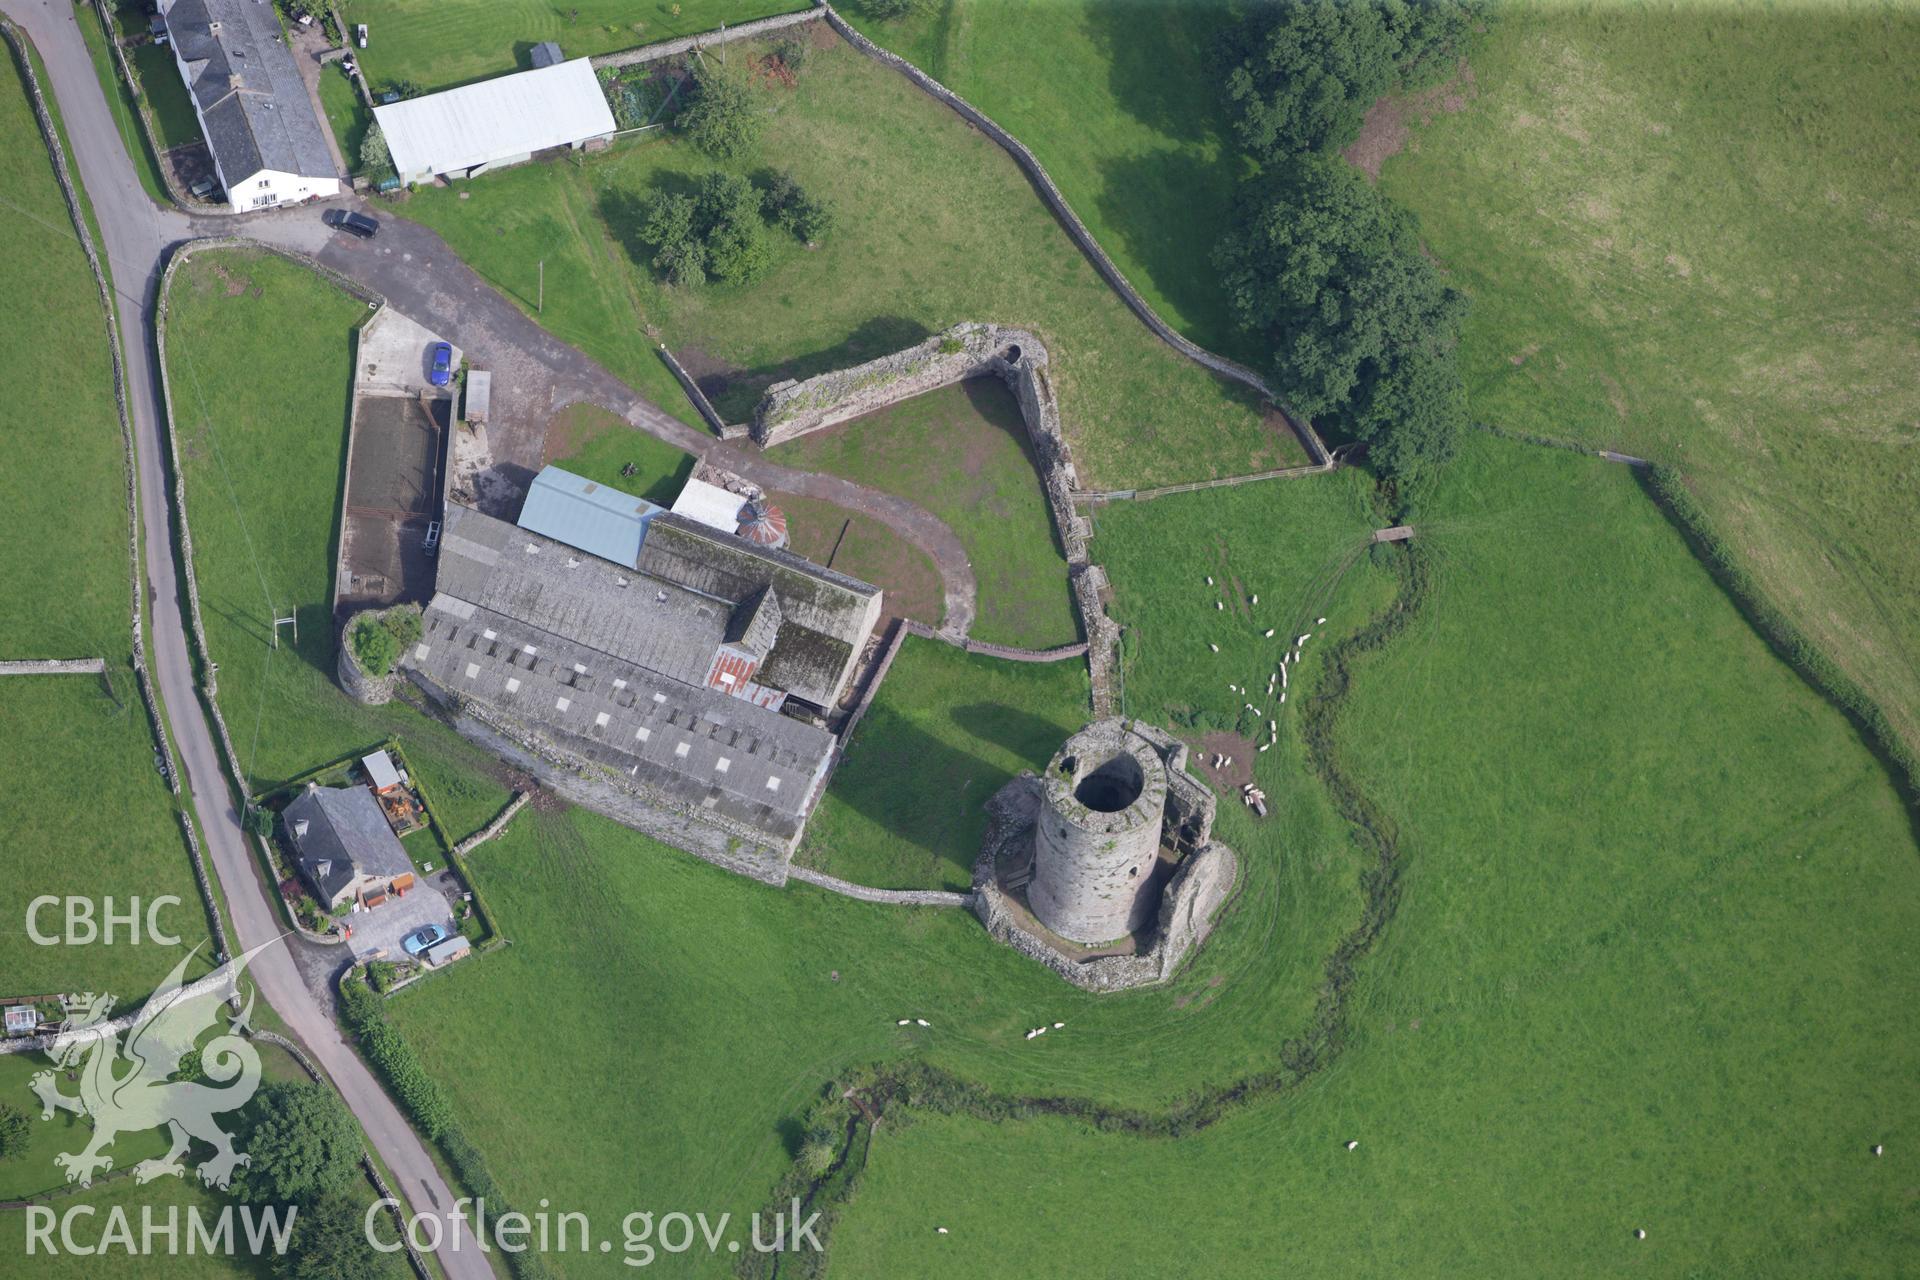 RCAHMW colour oblique aerial photograph of Tretower Castle. Taken on 23 July 2009 by Toby Driver